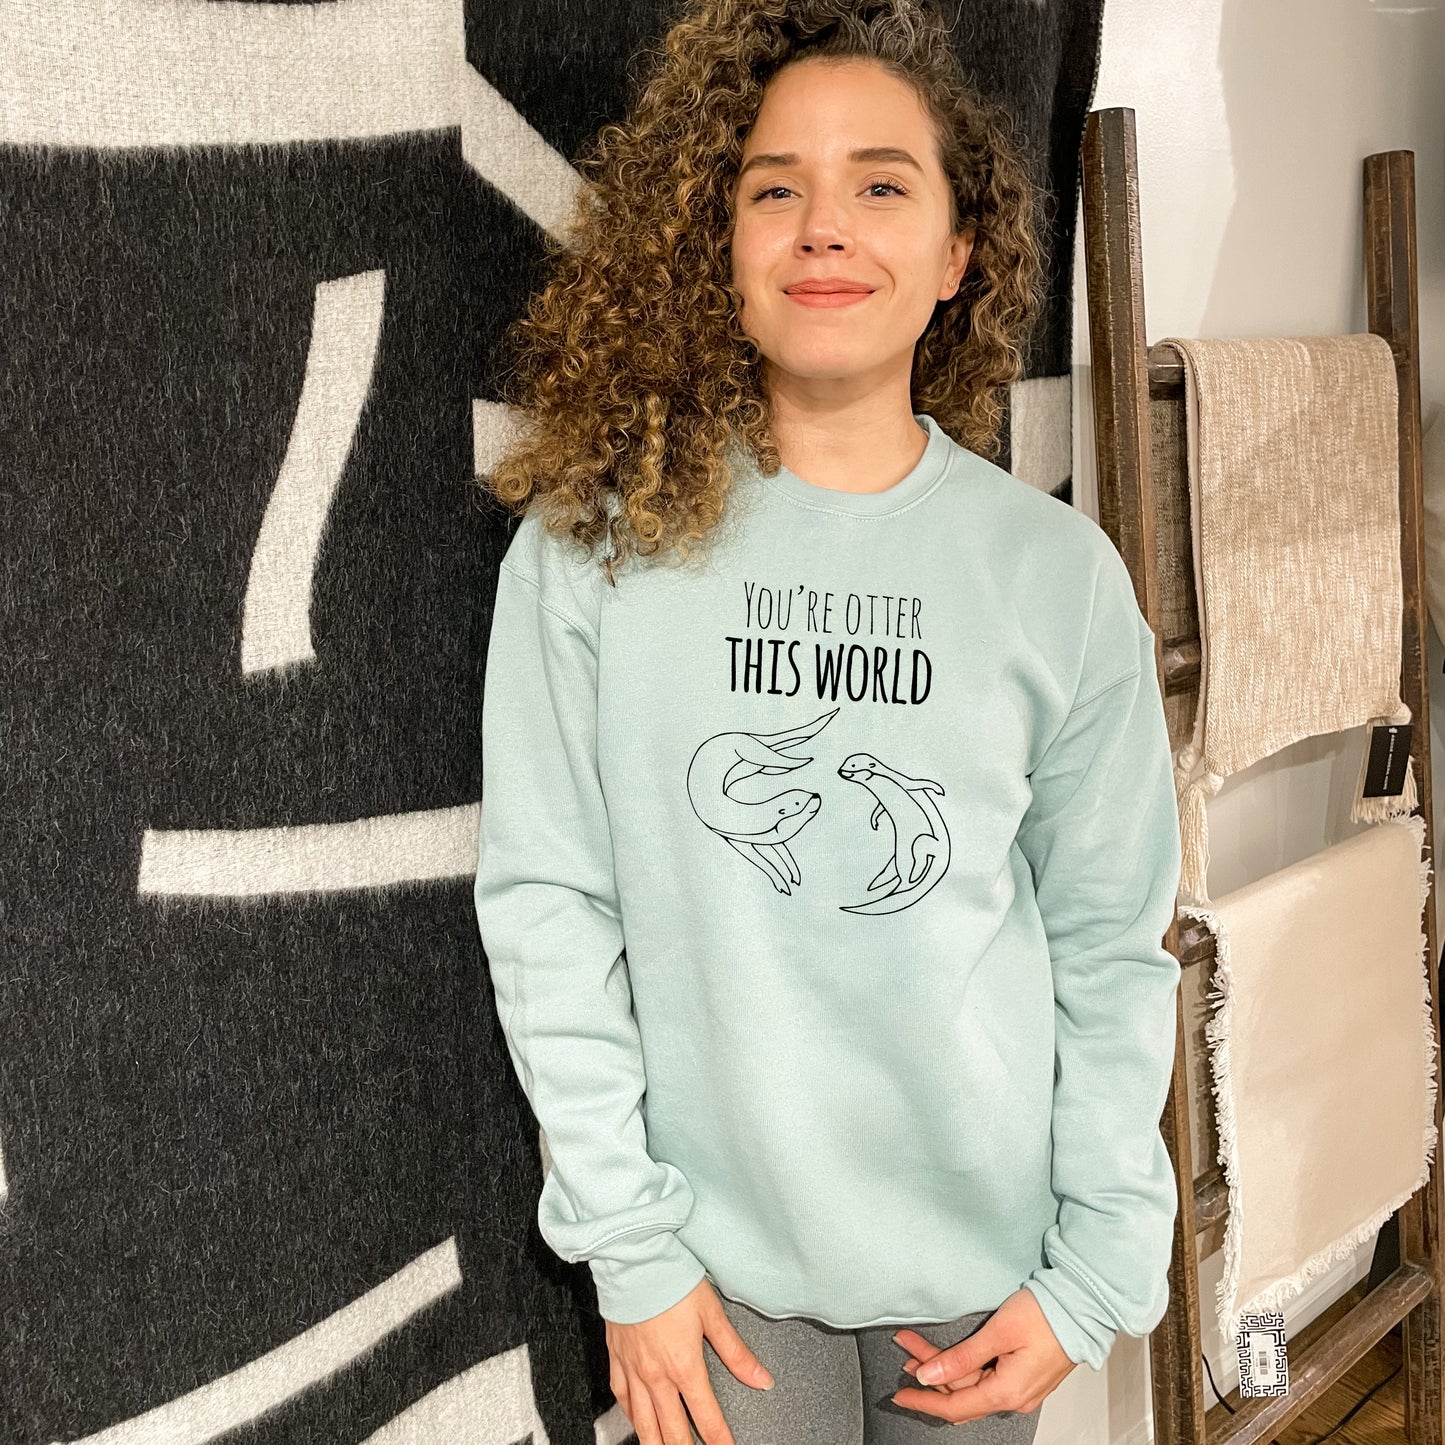 You're Otter This World - Unisex Sweatshirt - Heather Gray or Dusty Blue